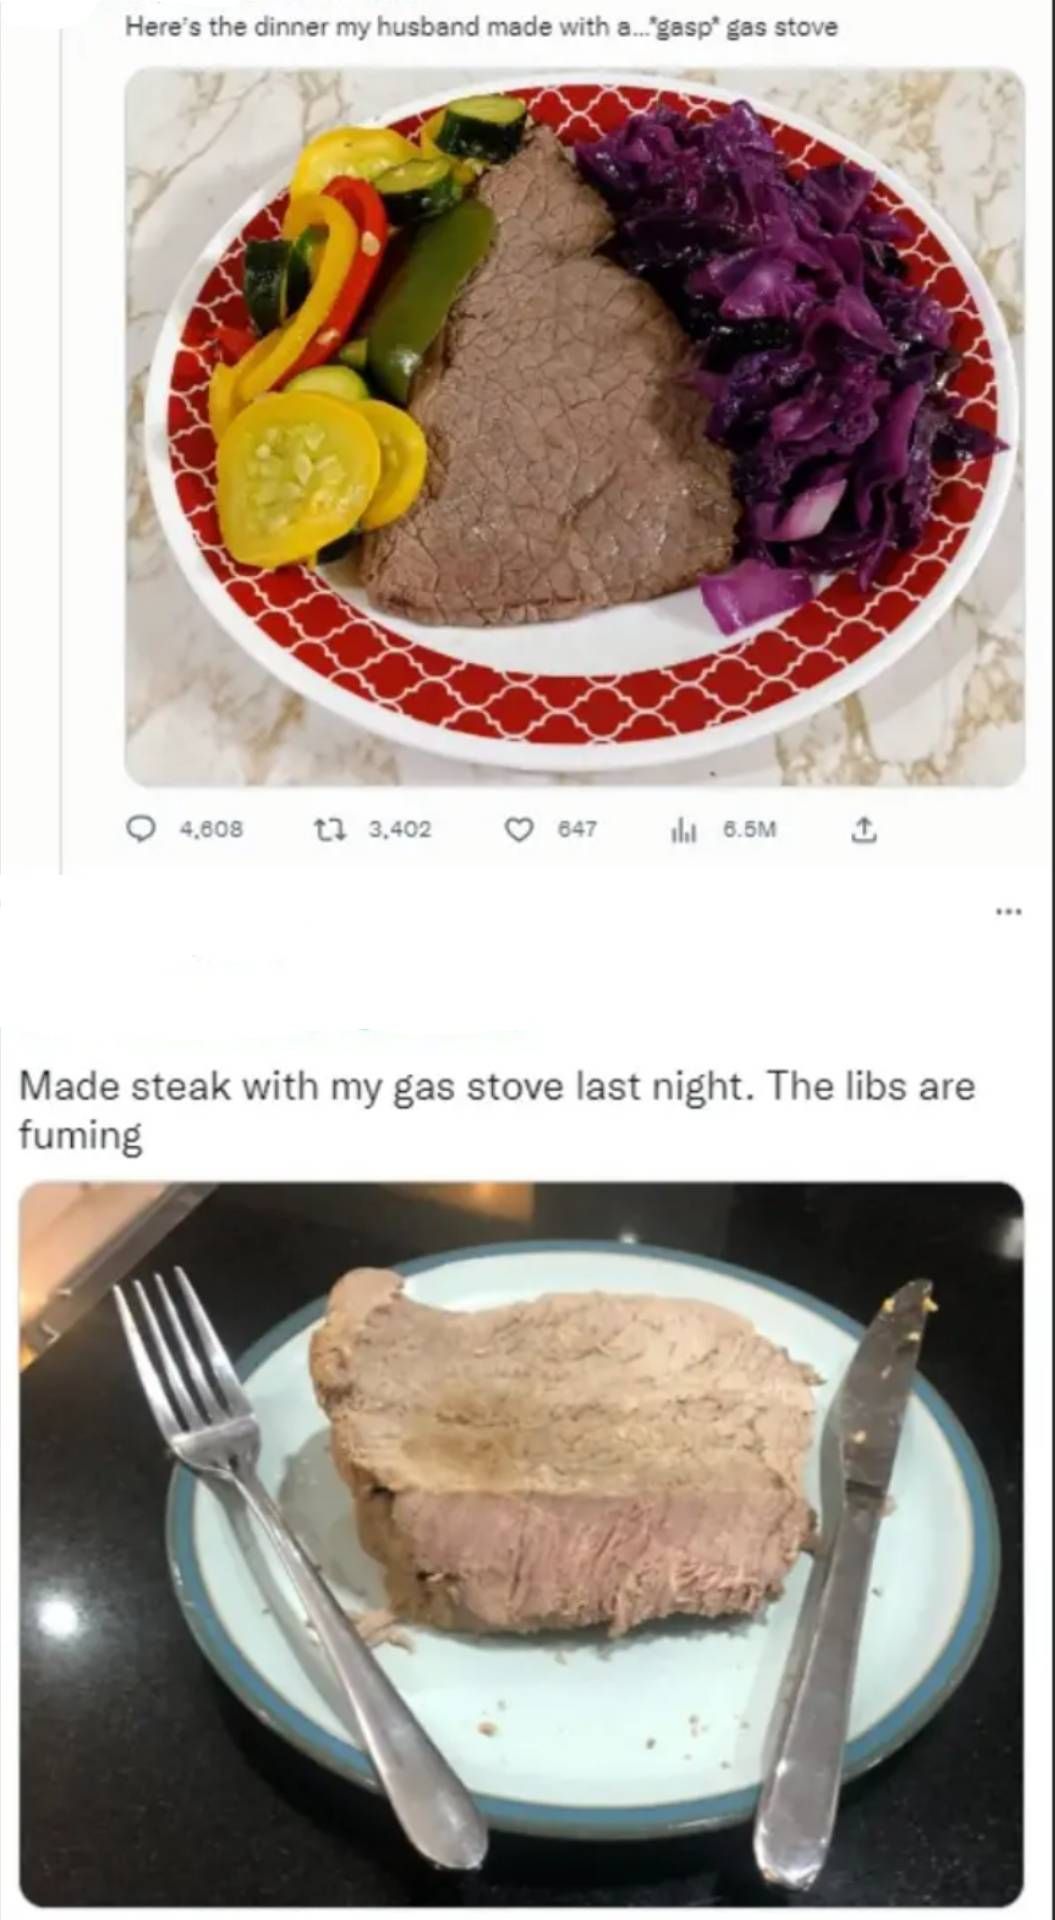 Poor steak didn't stand a chance against all those btus